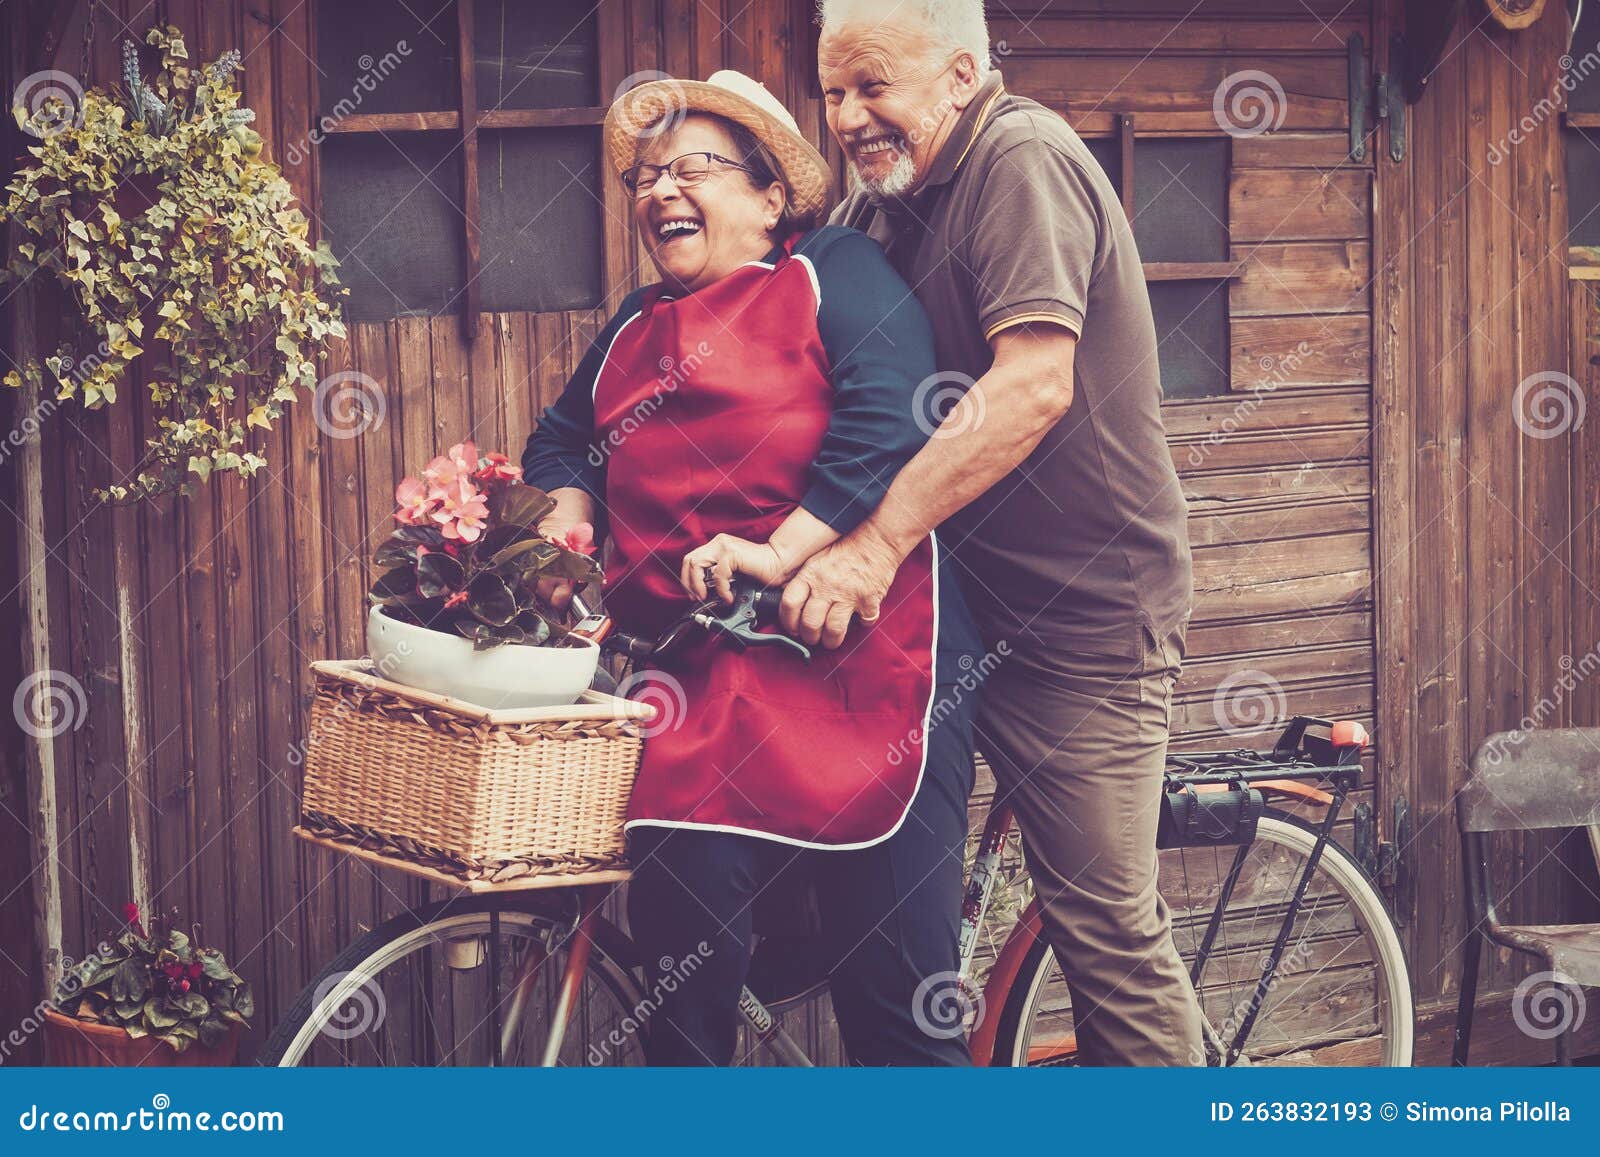 one old senior couple have fun together playing and joking outdoor on a bike. active mature man and woman aging youthfully with